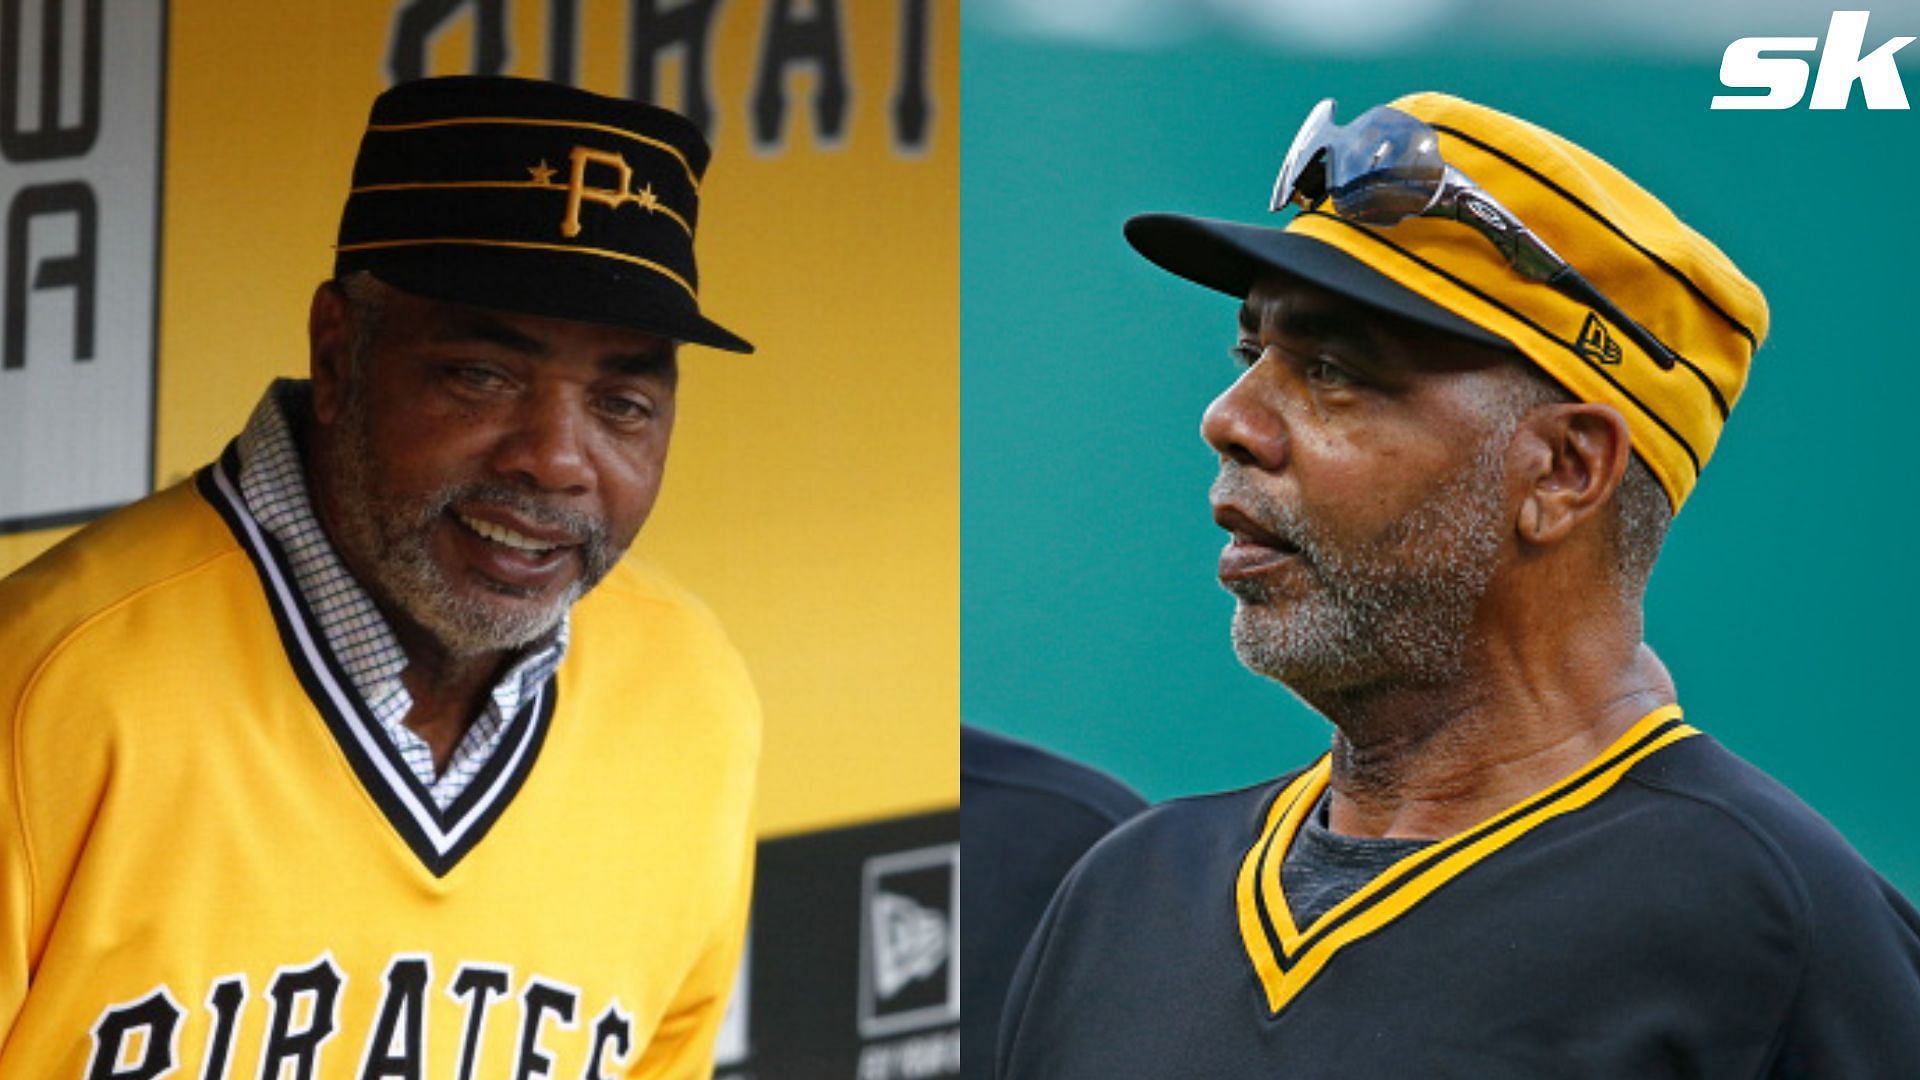 The dark story of Dave Parker